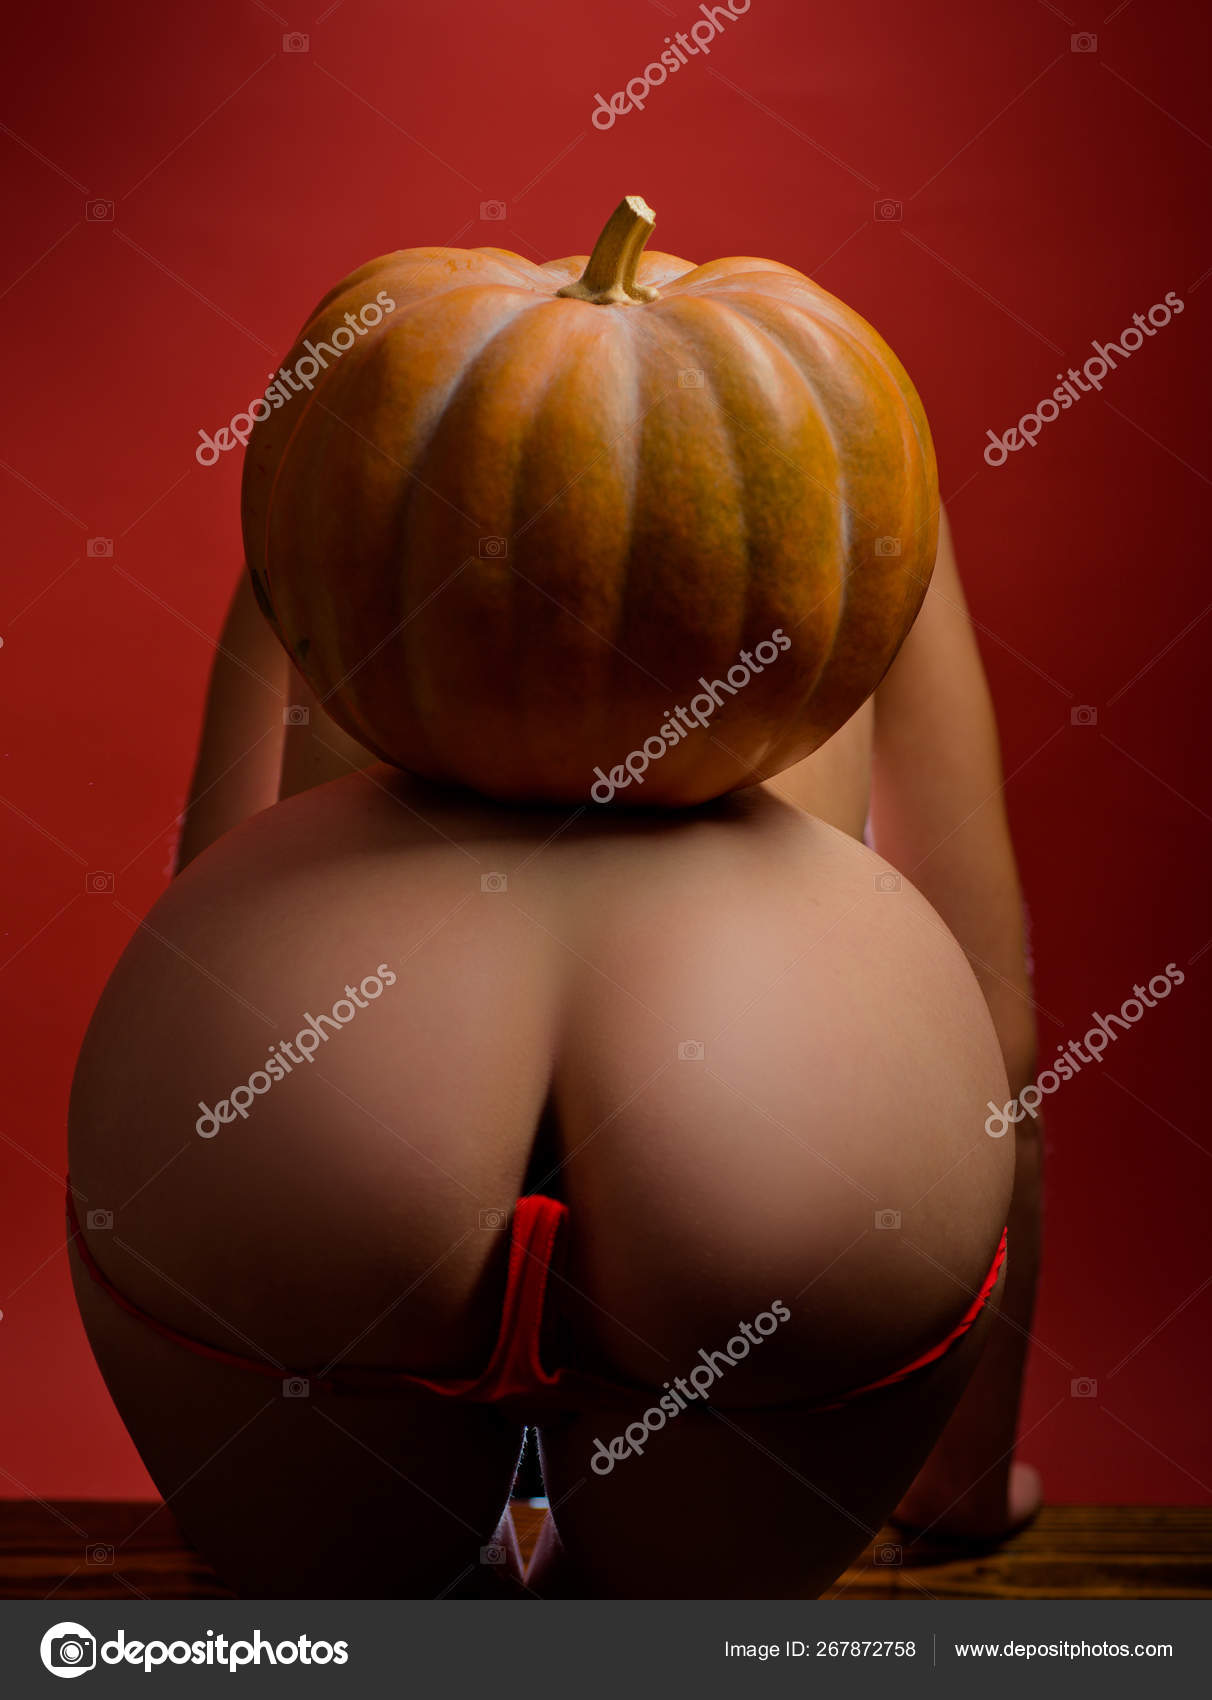 Female with sexy ass posing. Pose for sex and kamasutra concept. Love position sensual woman. Anal sex and female orgasm. Sale on sex shop. Sexual costume photo